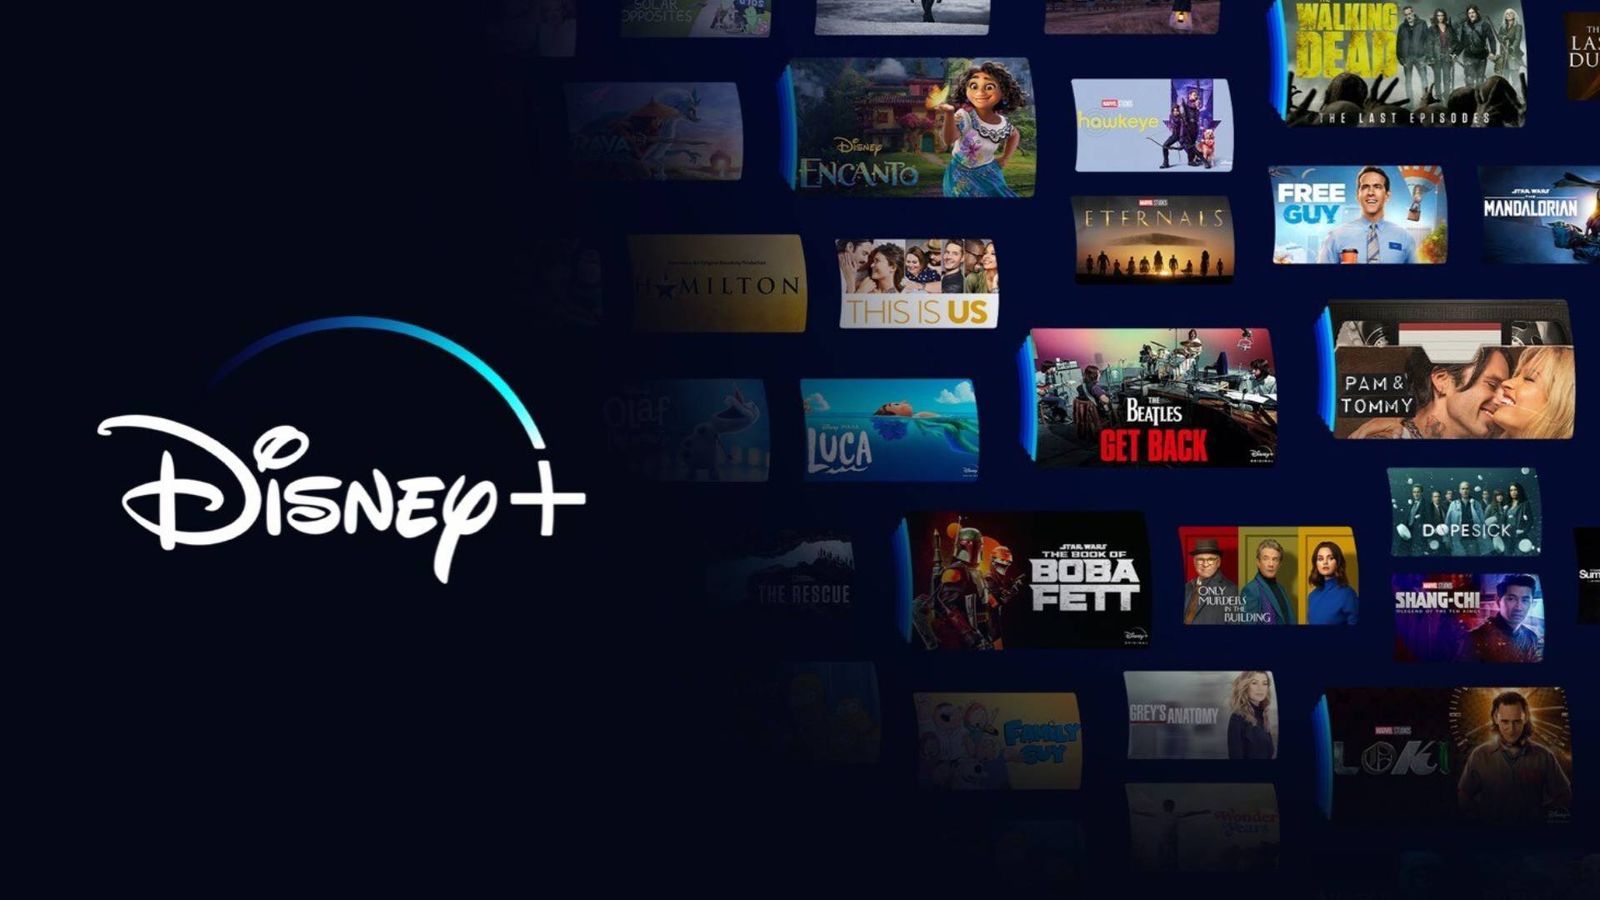 Disney Plus error code 73 - An image of the Disney logo alongside some titles available on the platform